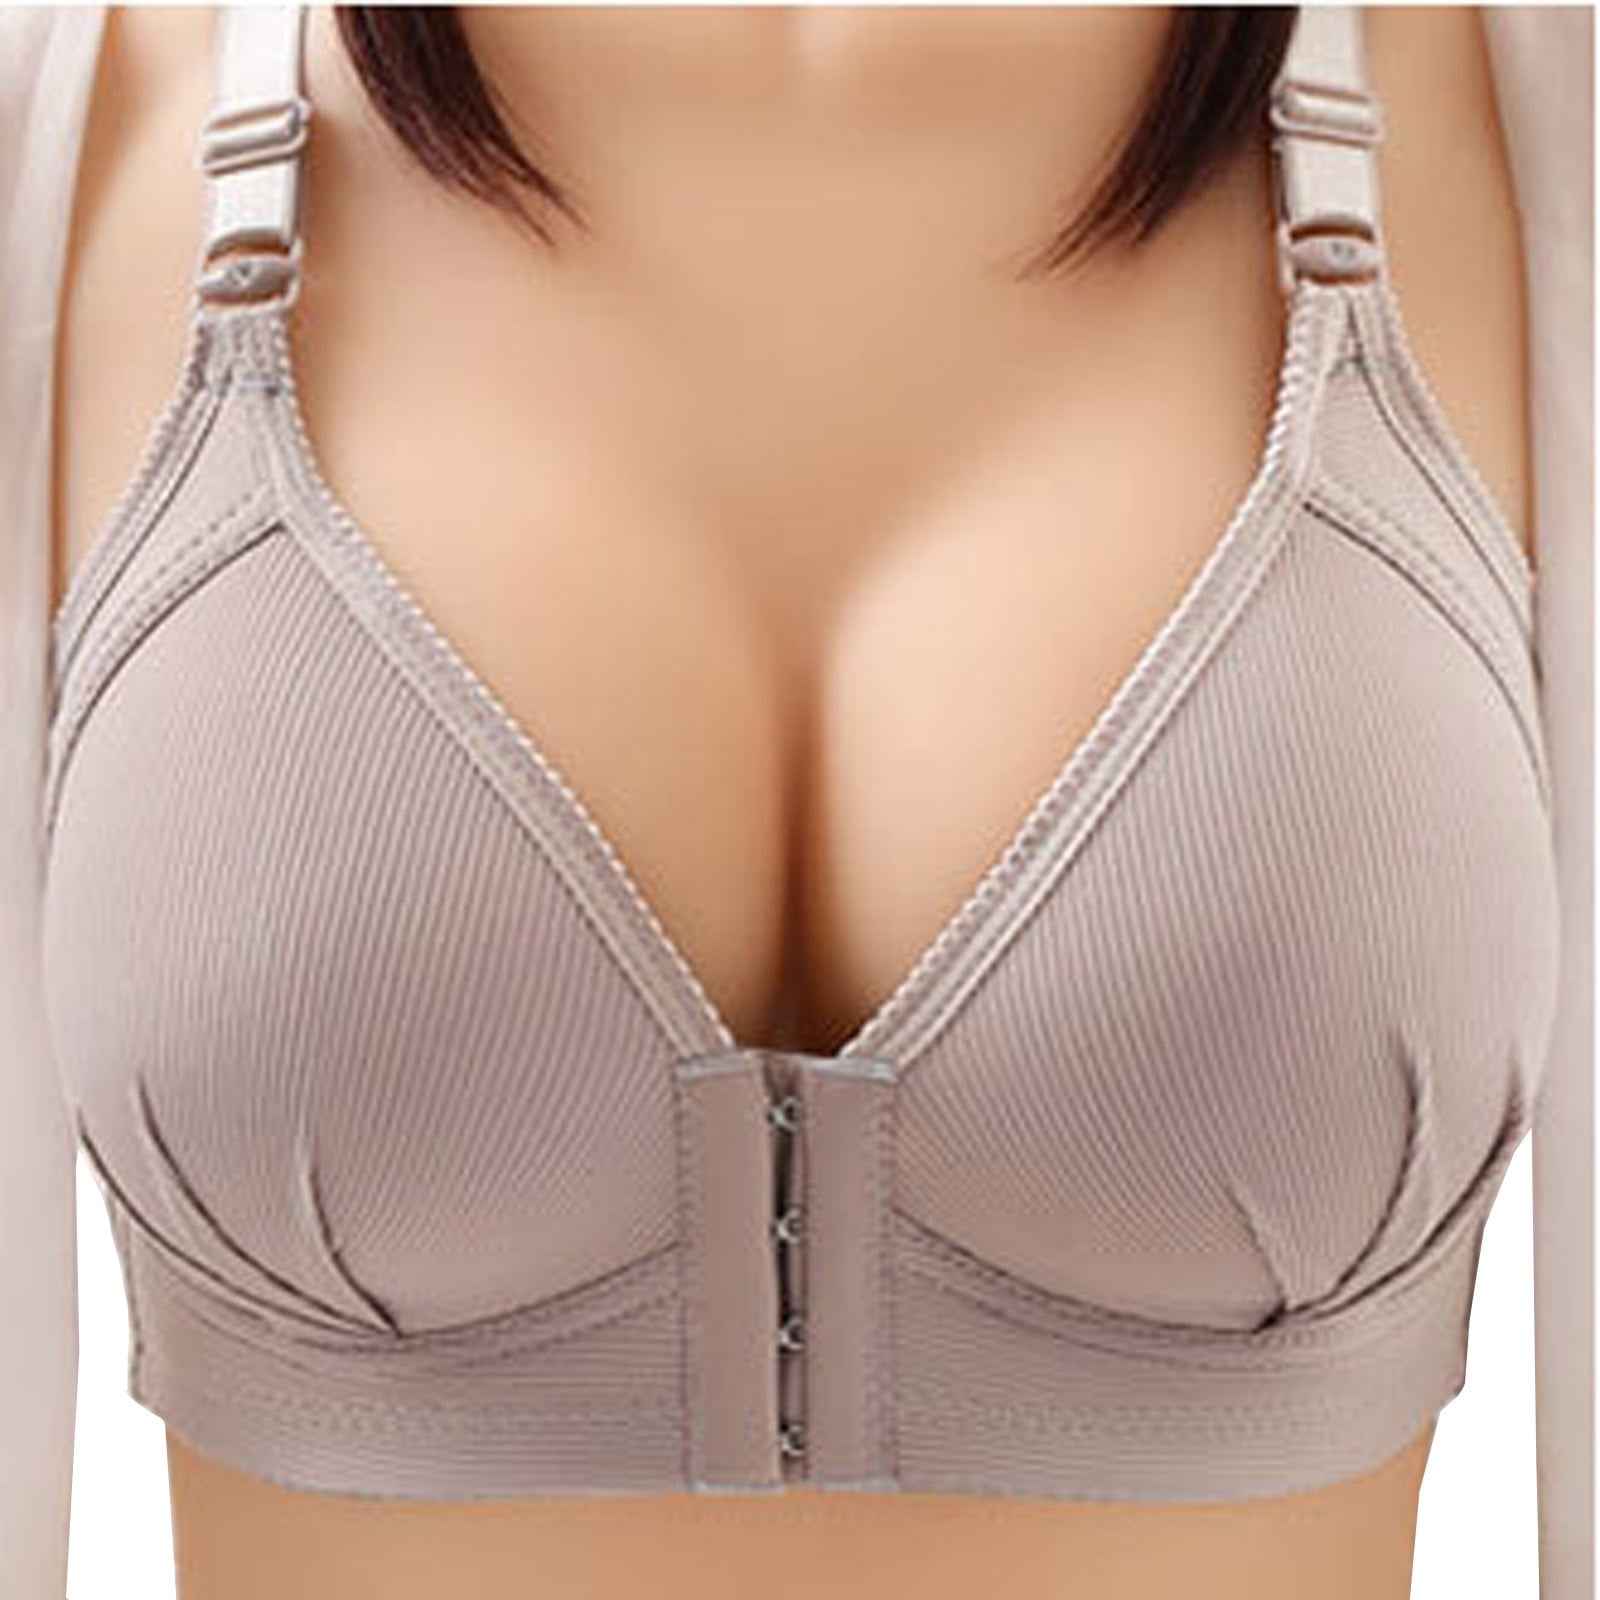 Ozmmyan Wirefree Bras for Women ,Plus Size Front Closure Lace Bra  Wirefreee Extra-Elastic Bra Adjustable Shoulder Straps Sports Bras 36C-46C,  Summer Savings Clearance 